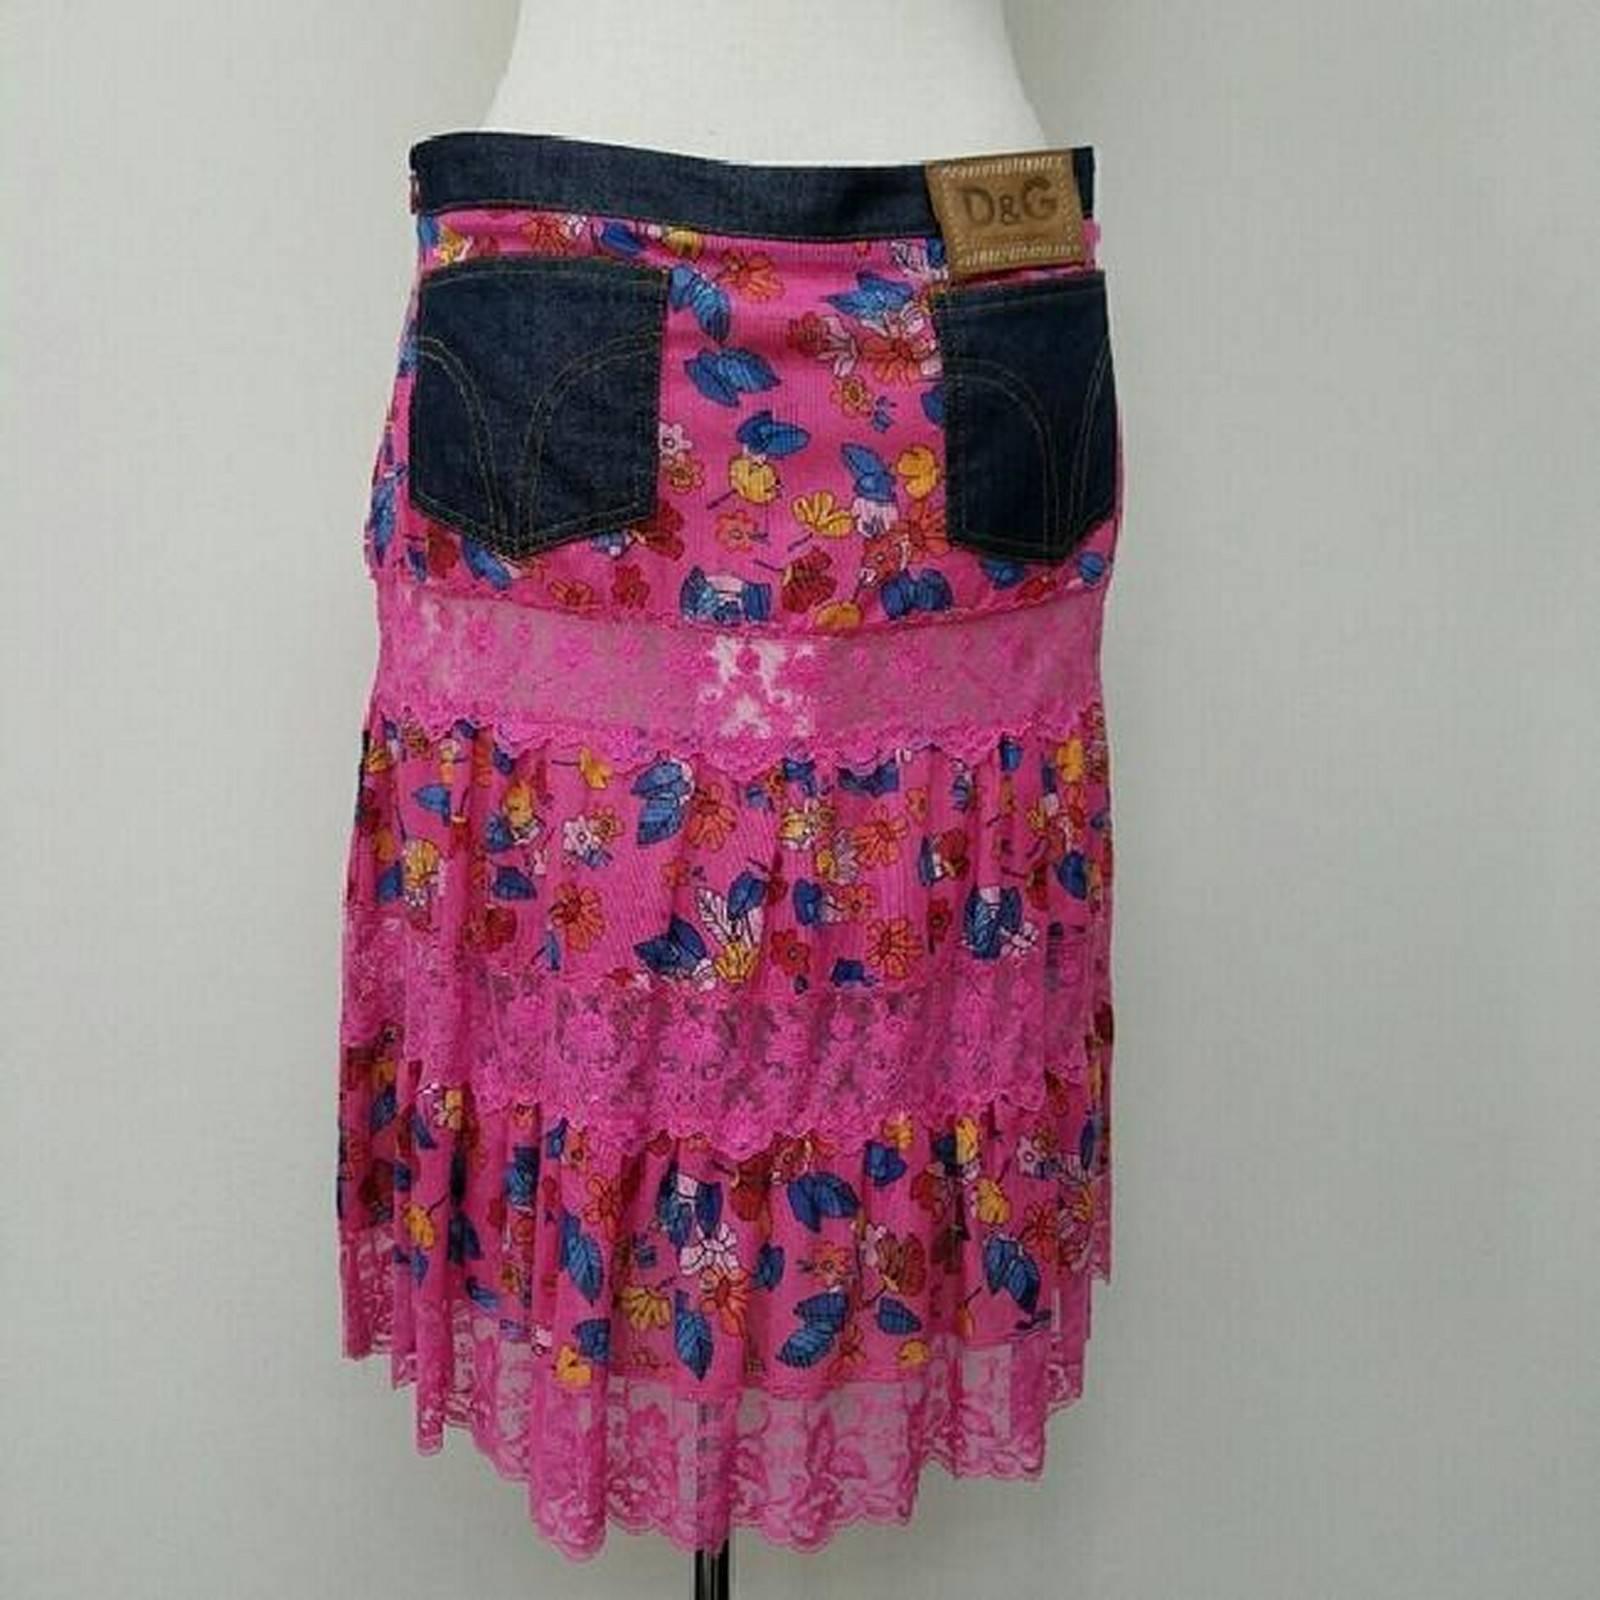 Dolce&Gabbana Lace Skirt

Flower skirt with denim pockets.Brand new. Never used. Tags still attached. MADE IN ITALY

Type:Skirts
Size:12 (L, 32, 33)
Color:pink
Style/Collection:Dolce&Gabbana Lace Skirt